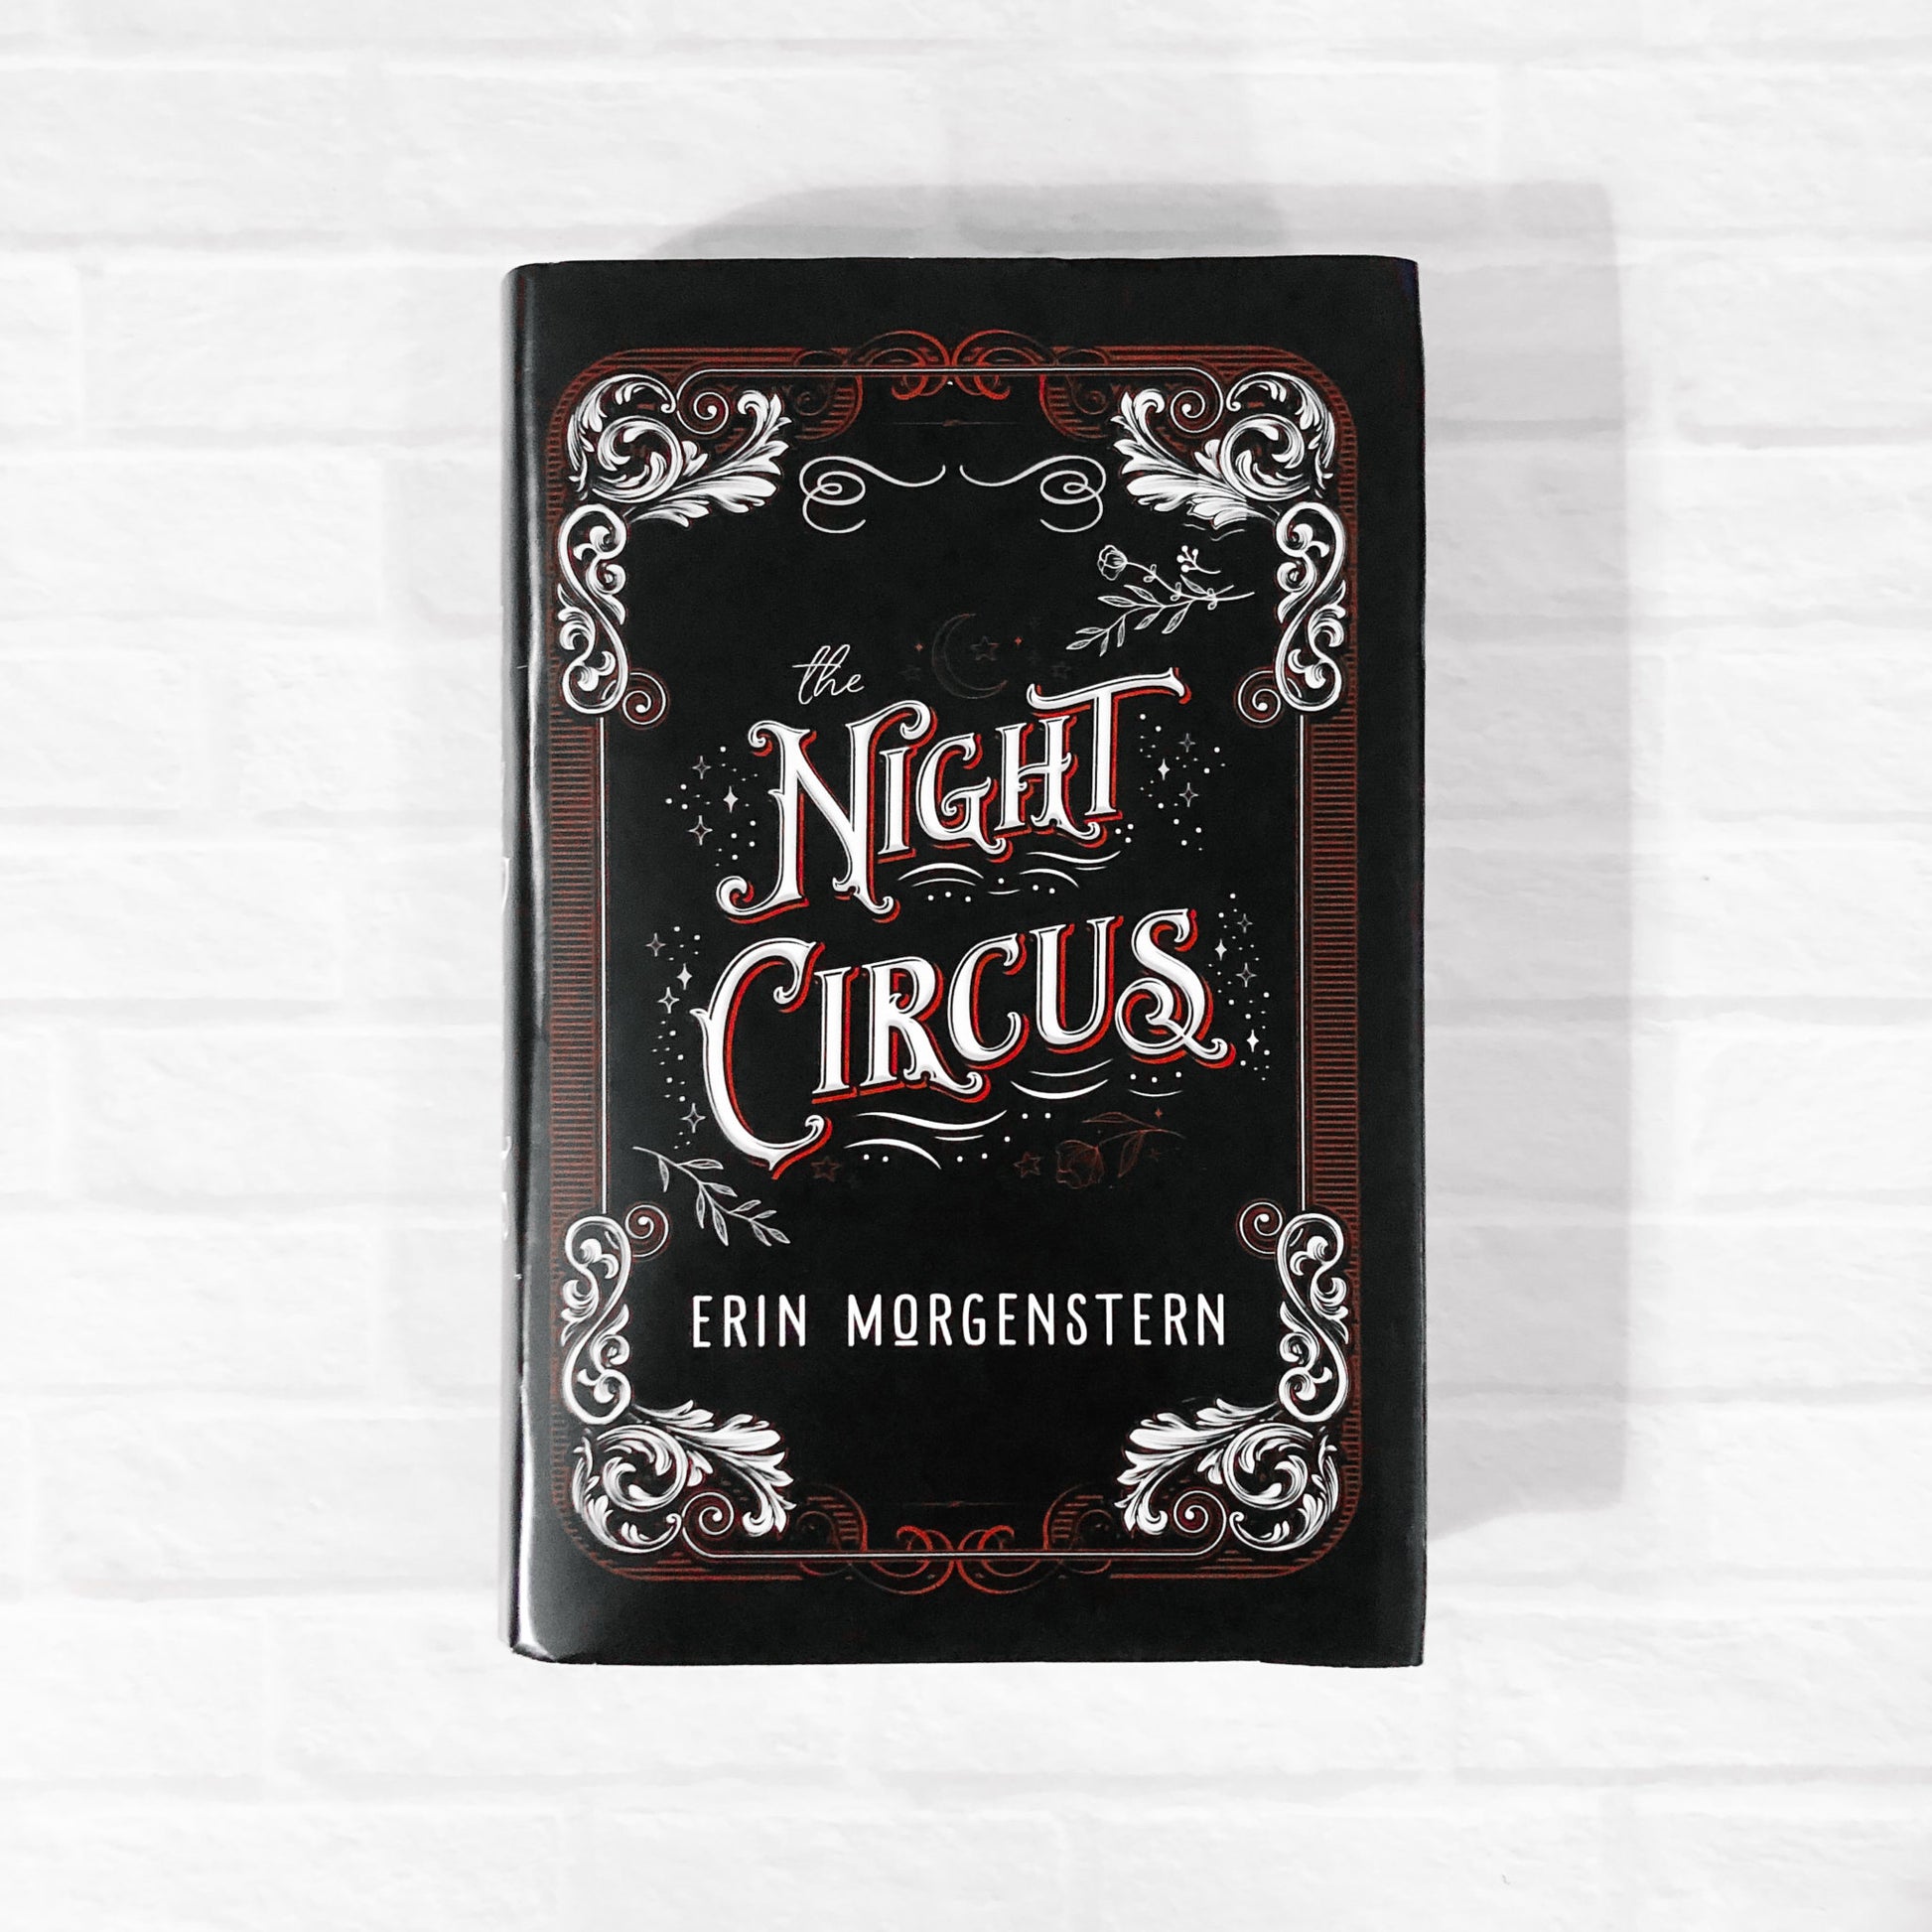 custom designed book cover dust jacket for The Night Circus by Erin Morgenstern